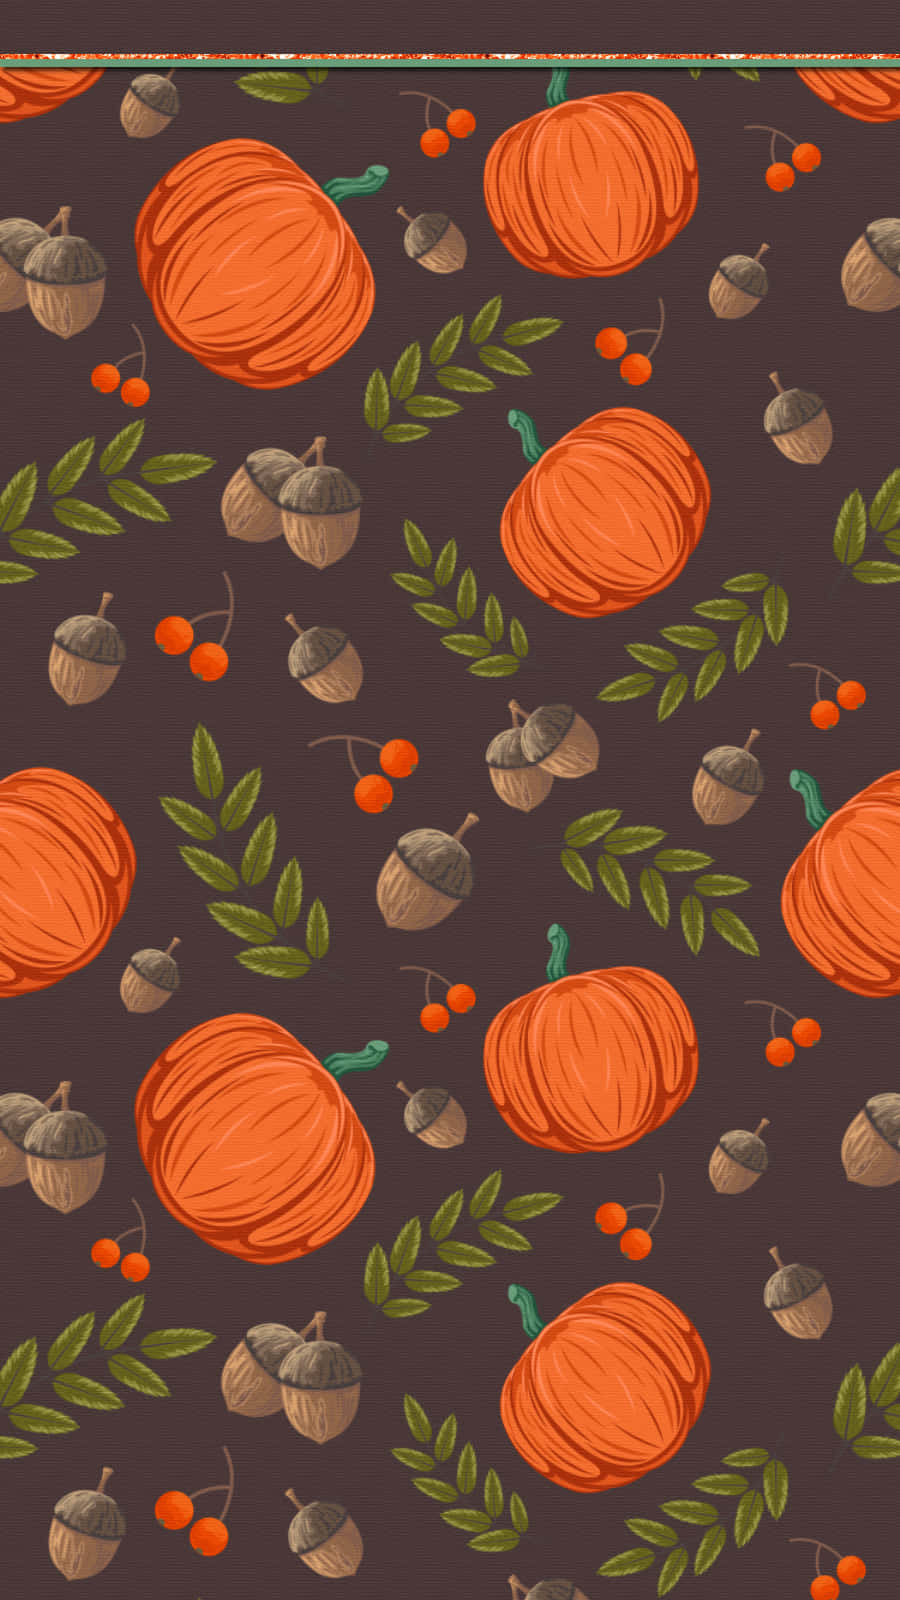 Give Your Screen An Update With A Fall iPhone Wallpaper